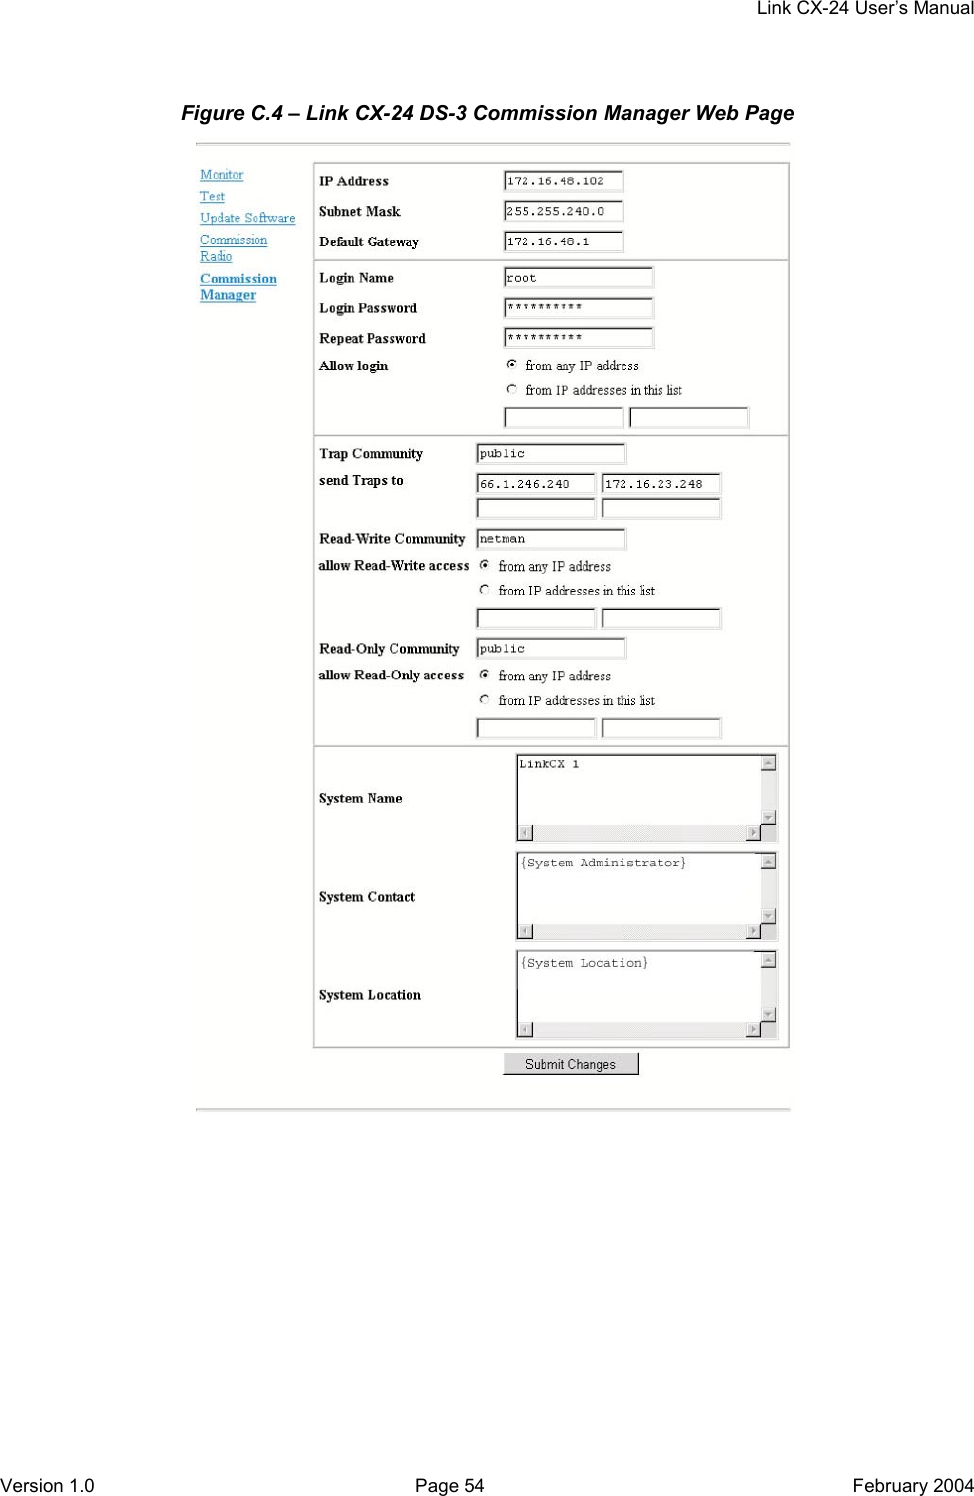     Link CX-24 User’s Manual Version 1.0  Page 54  February 2004 Figure C.4 – Link CX-24 DS-3 Commission Manager Web Page   